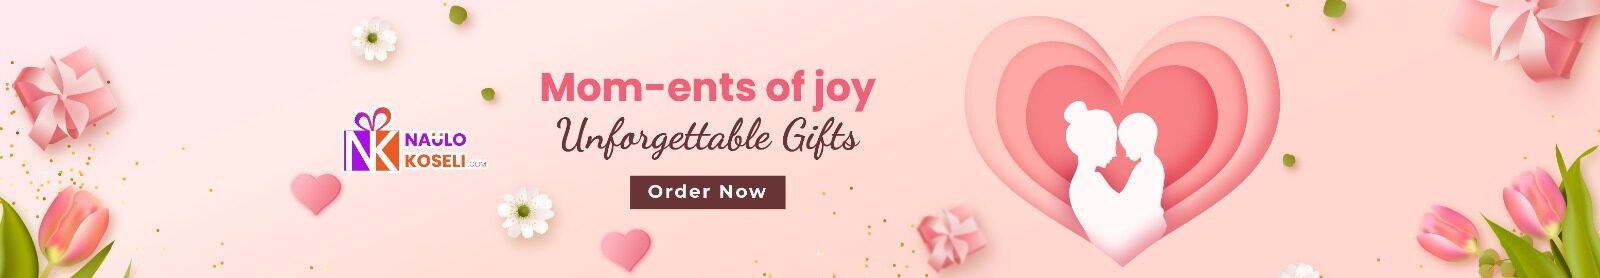 Mom-ents of joy unforgettable gifts